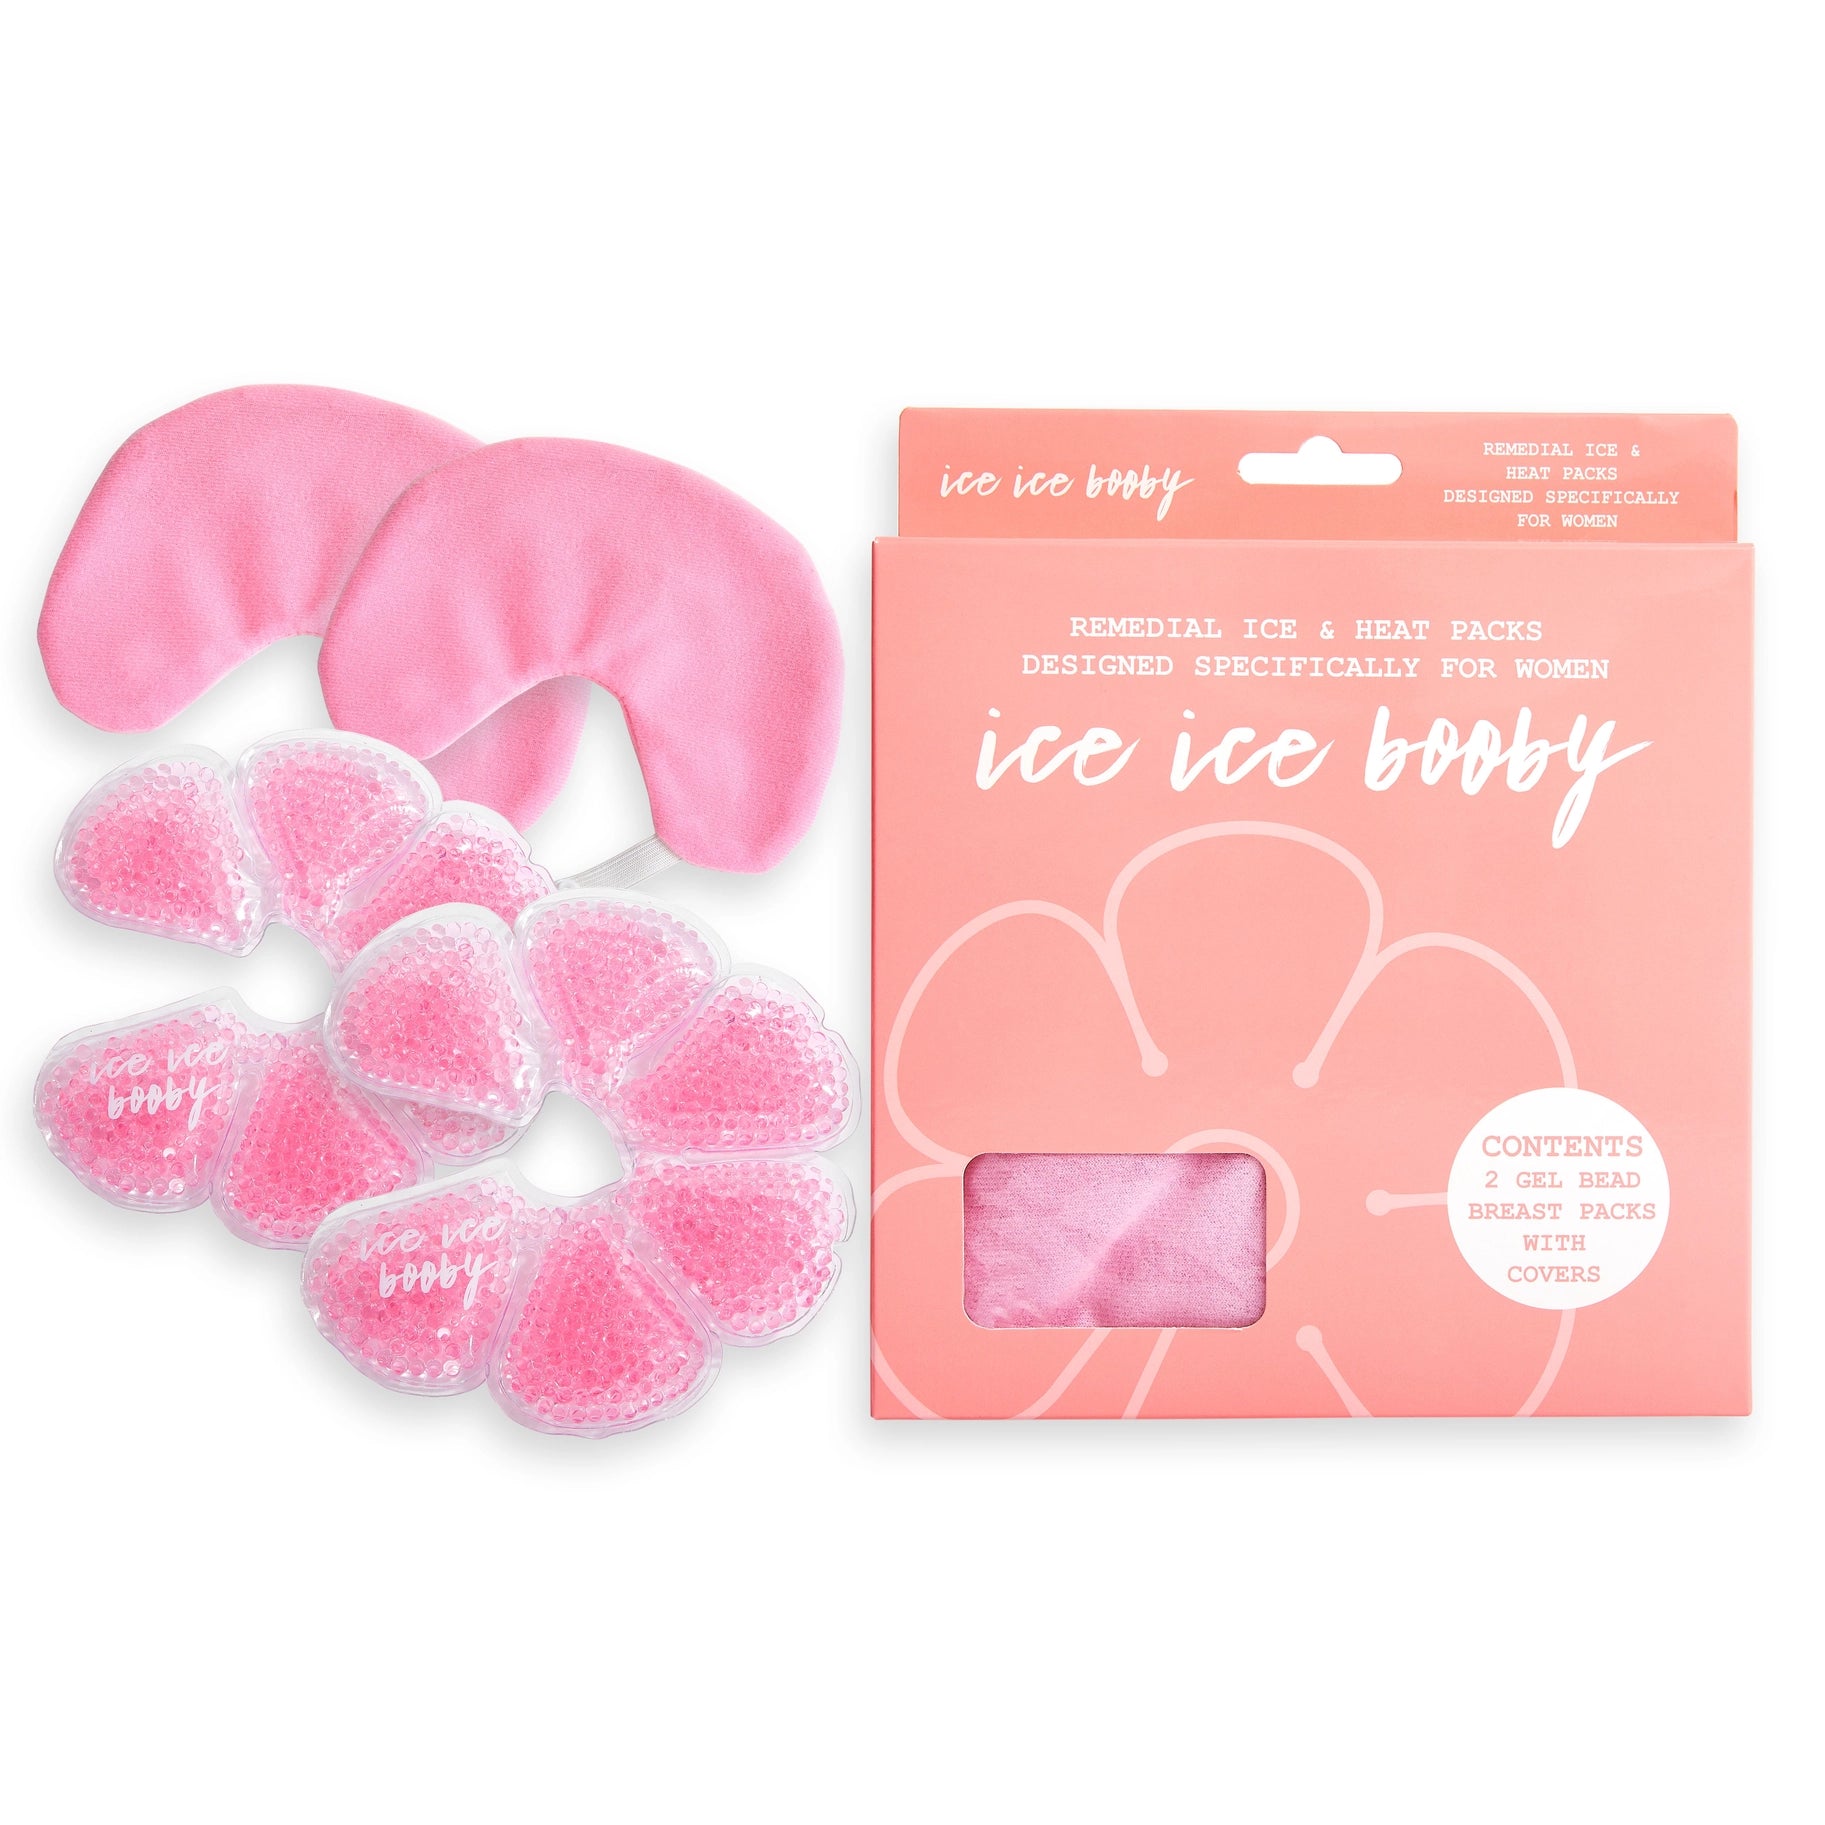 How to use heat and ice pack for discomfort, decrease pain and inflammation associated with childbirth and breastfeeding issues including mastitis, engorgement, blocked milk ducts. The best heat and cold packs for women in Australia. Ice Ice Booby Breast Pack. Pregnant Labour Birth Postpartum Essential - Dear Mama Store Australia. Free shipping available.